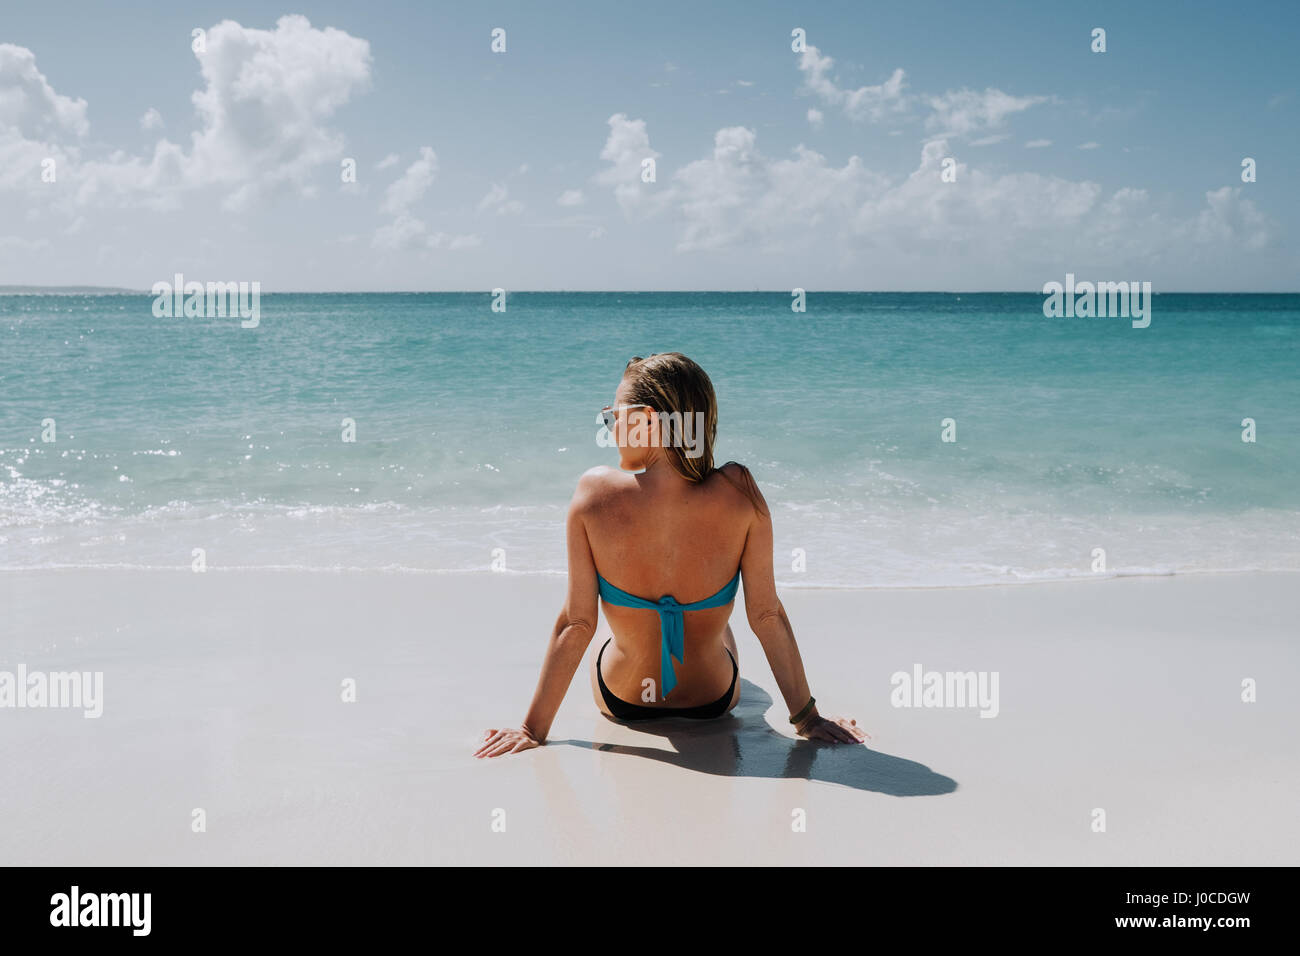 Rear view of woman in bikini sitting on beach looking out du blue sea, Anguilla, Saint Martin, Caraïbes Banque D'Images